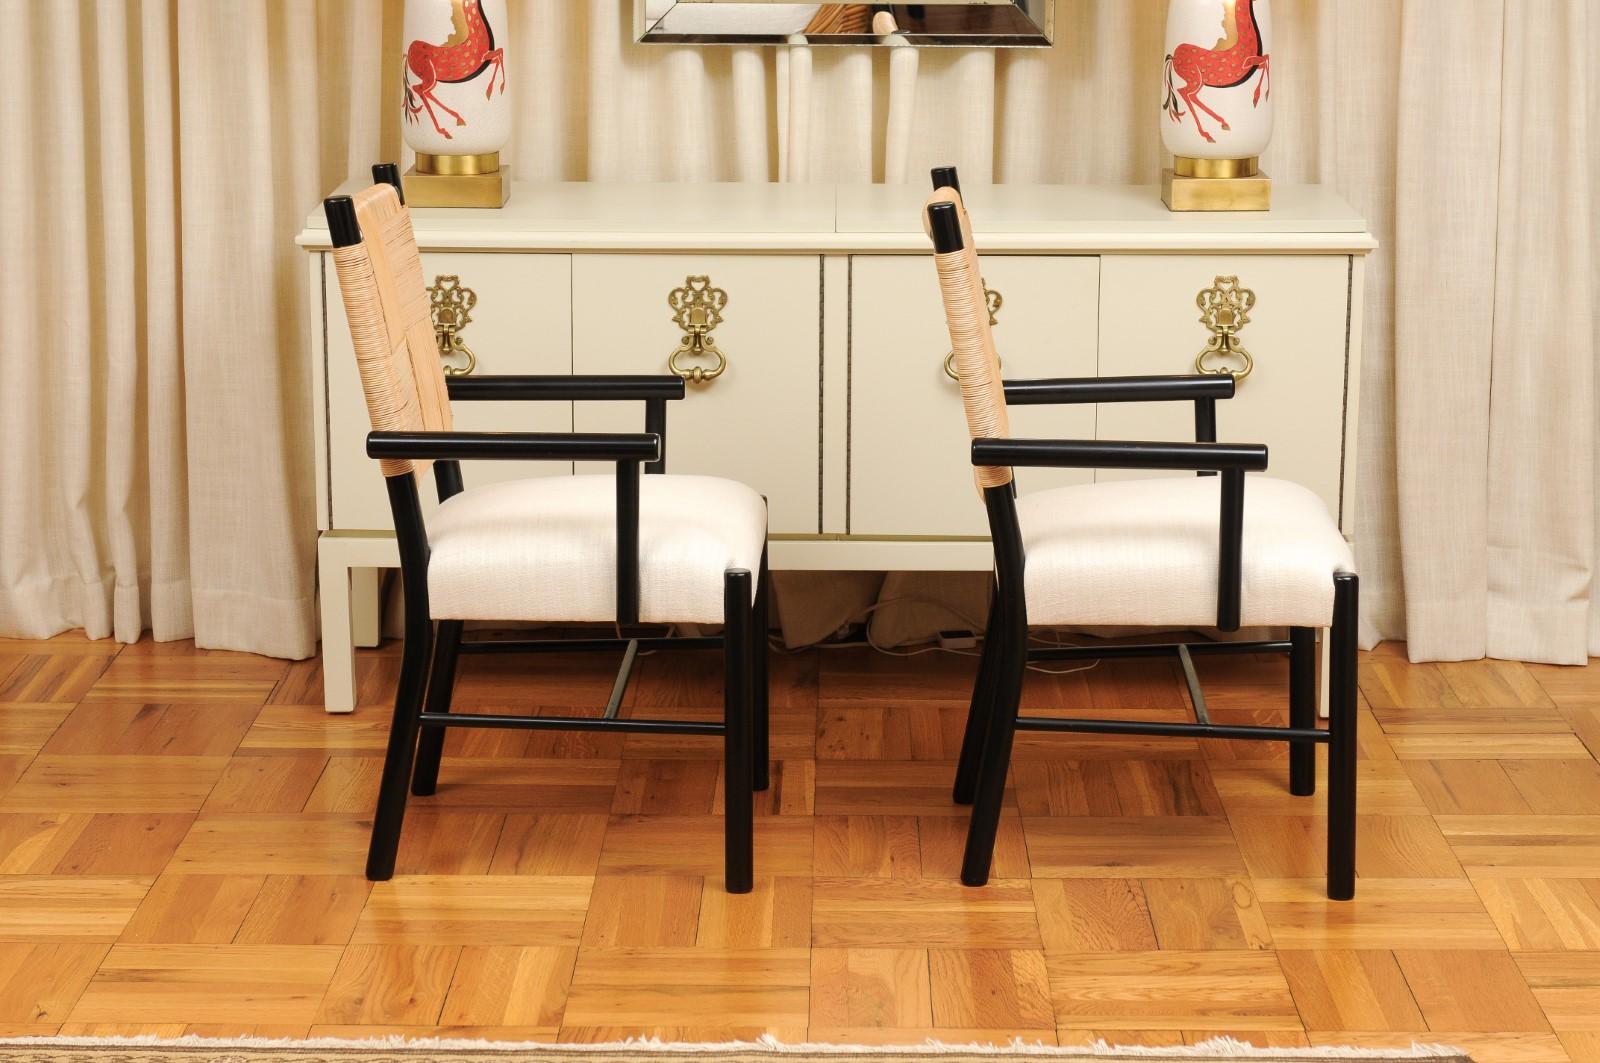 All Arms- Sublime Set of 14 Cane Back Dining Chairs by John Hutton for Donghia For Sale 3